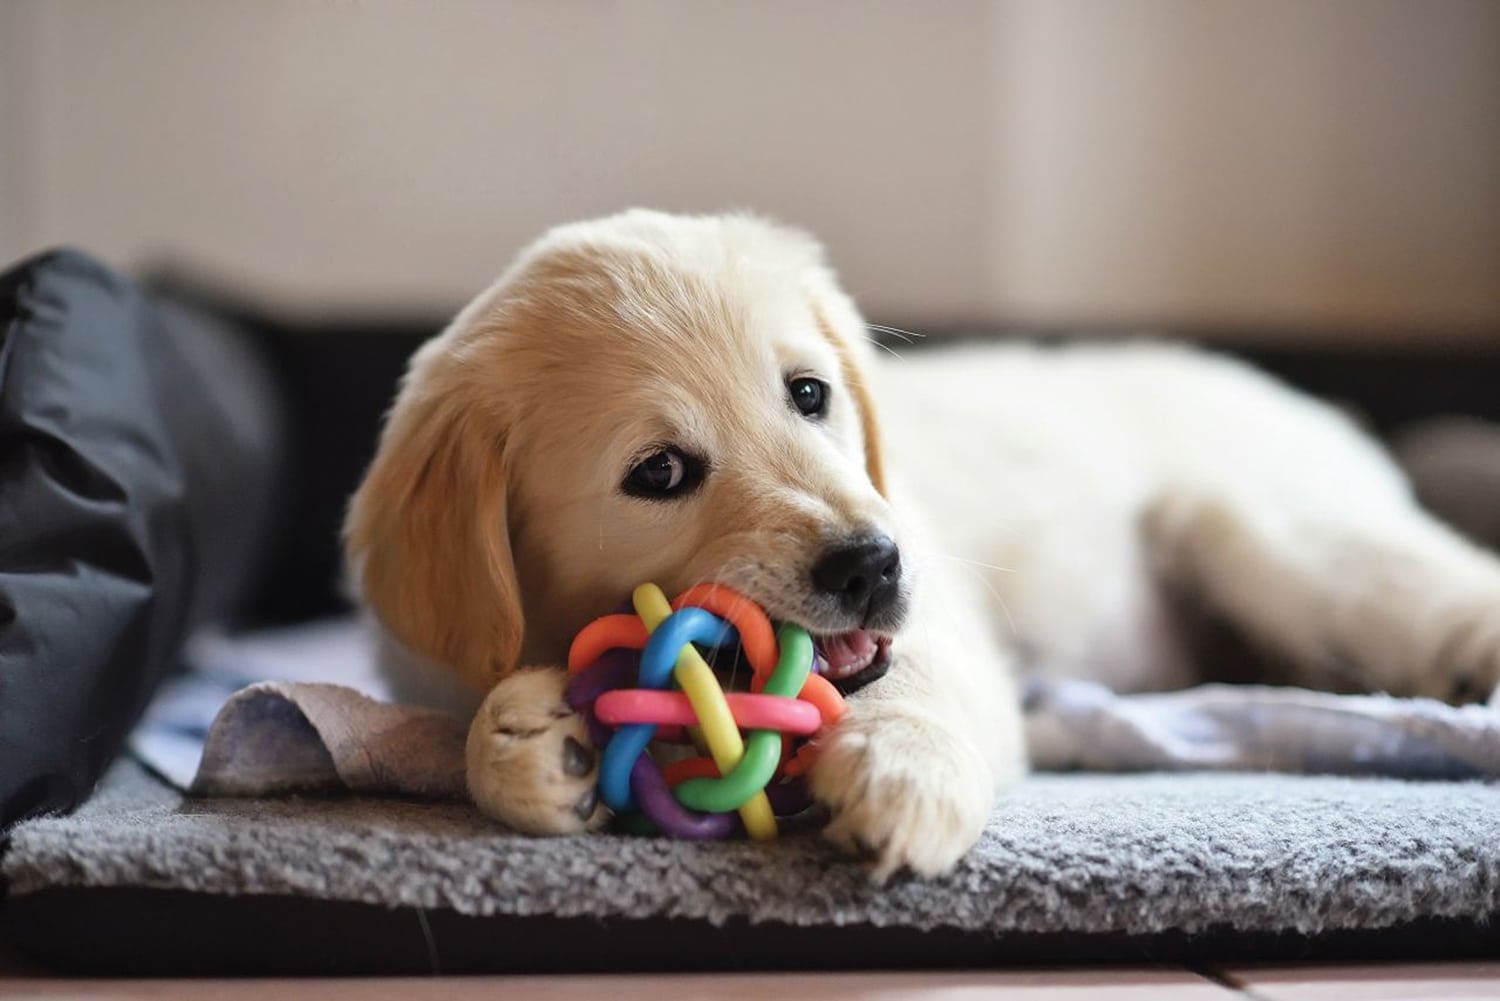 Puppy Chewing on toy